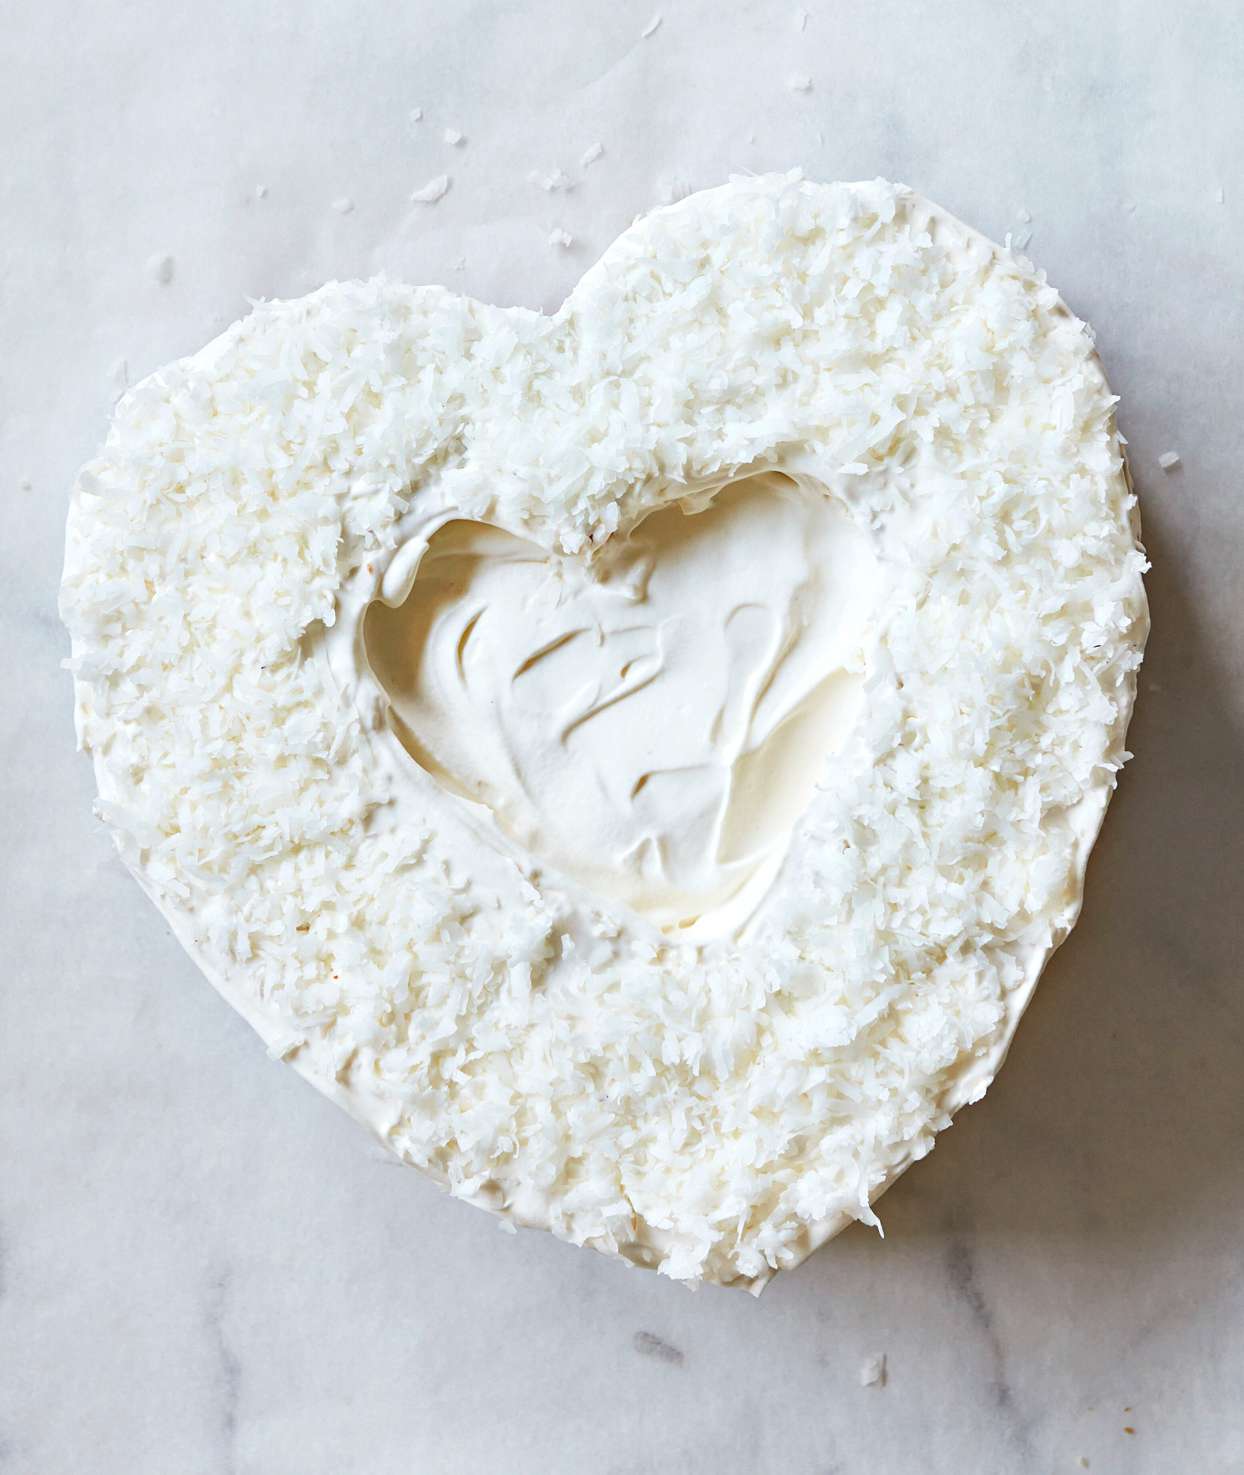 heart shaped cake with coconut flake layer